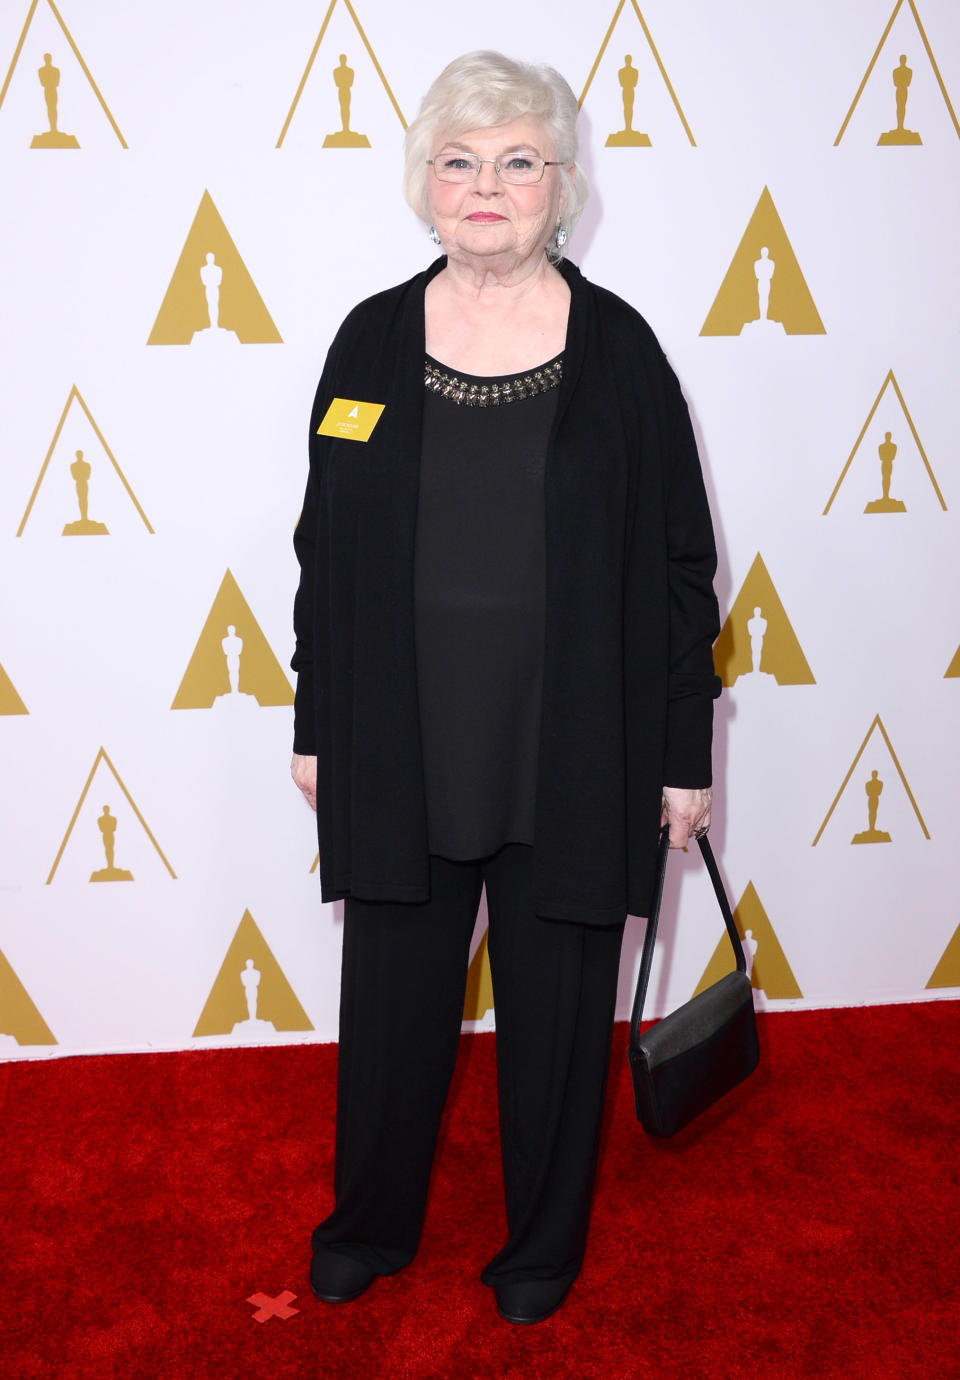 June Squibb arrives at the 86th Oscars Nominees Luncheon, on Monday, Feb. 10, 2014 in Beverly Hills, Calif. (Photo by Jordan Strauss/Invision/AP)